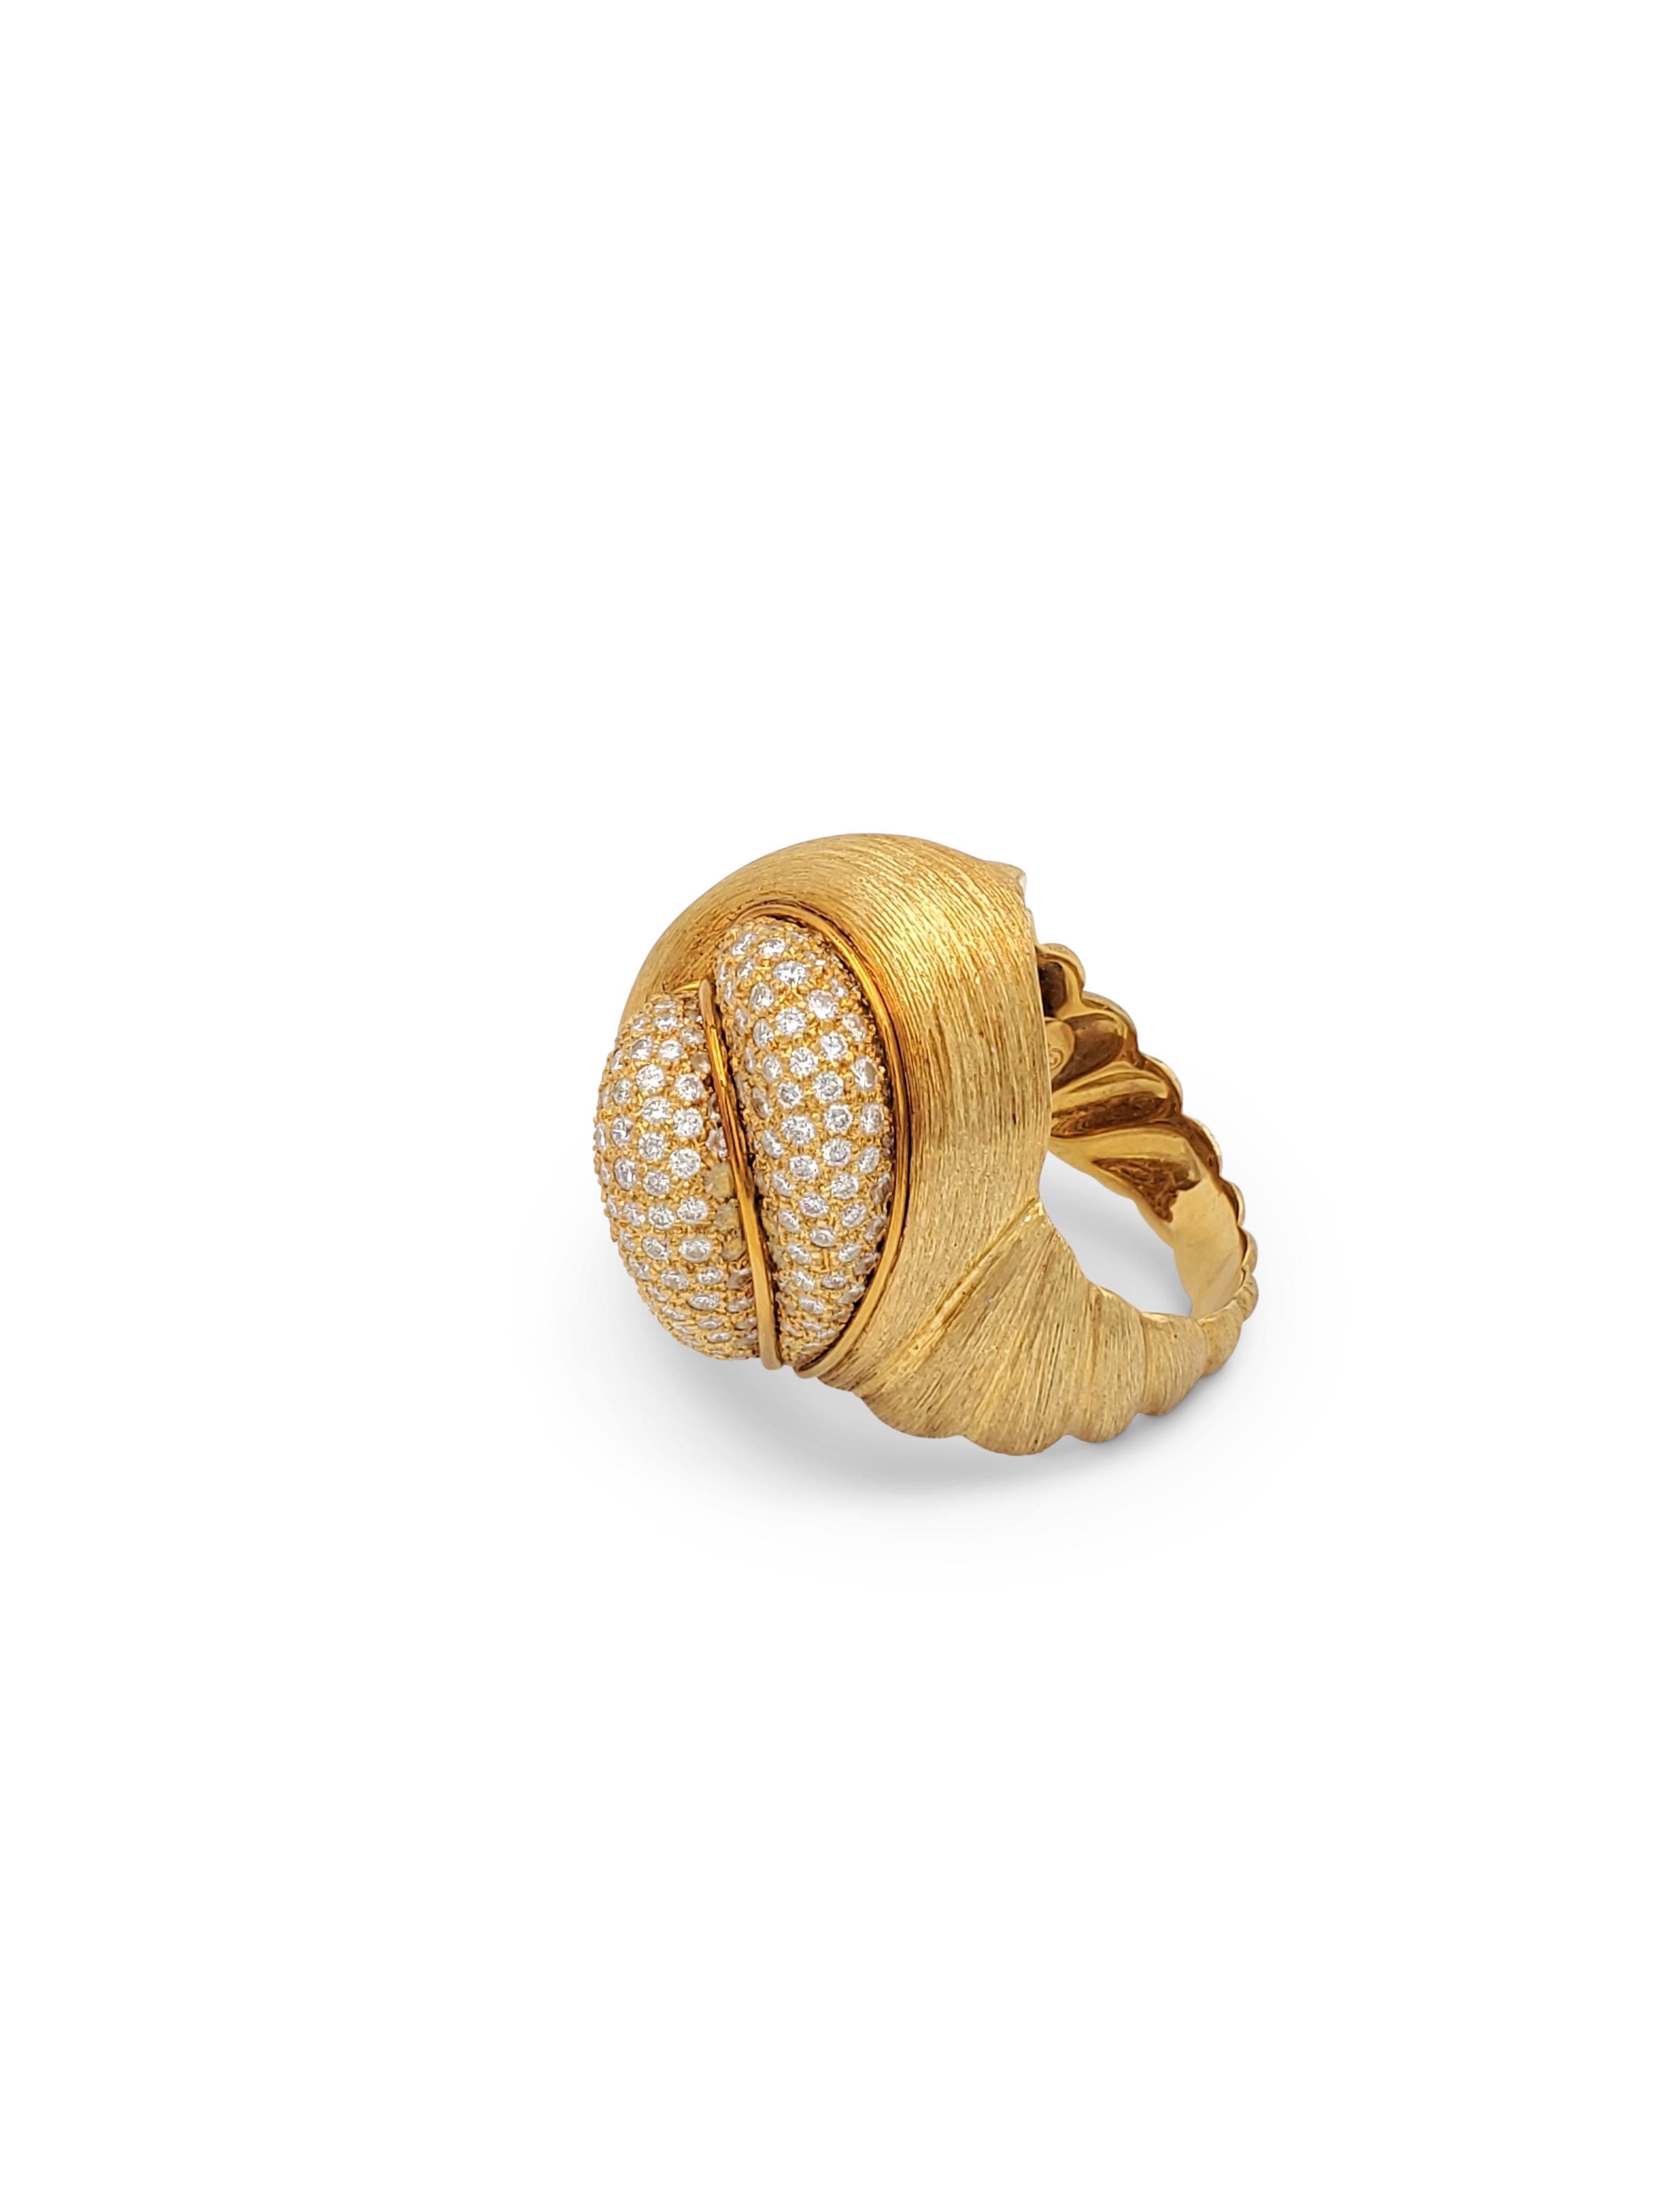 Authentic Henry Dunay 'Sabi' brushed gold finish ring features approximately 1.80 carats of high quality pave set round brilliant cut diamonds (E-F color, VS clarity). Signed Dunay with maker's mark for Henry Dunay, 750, with serial. The ring is not